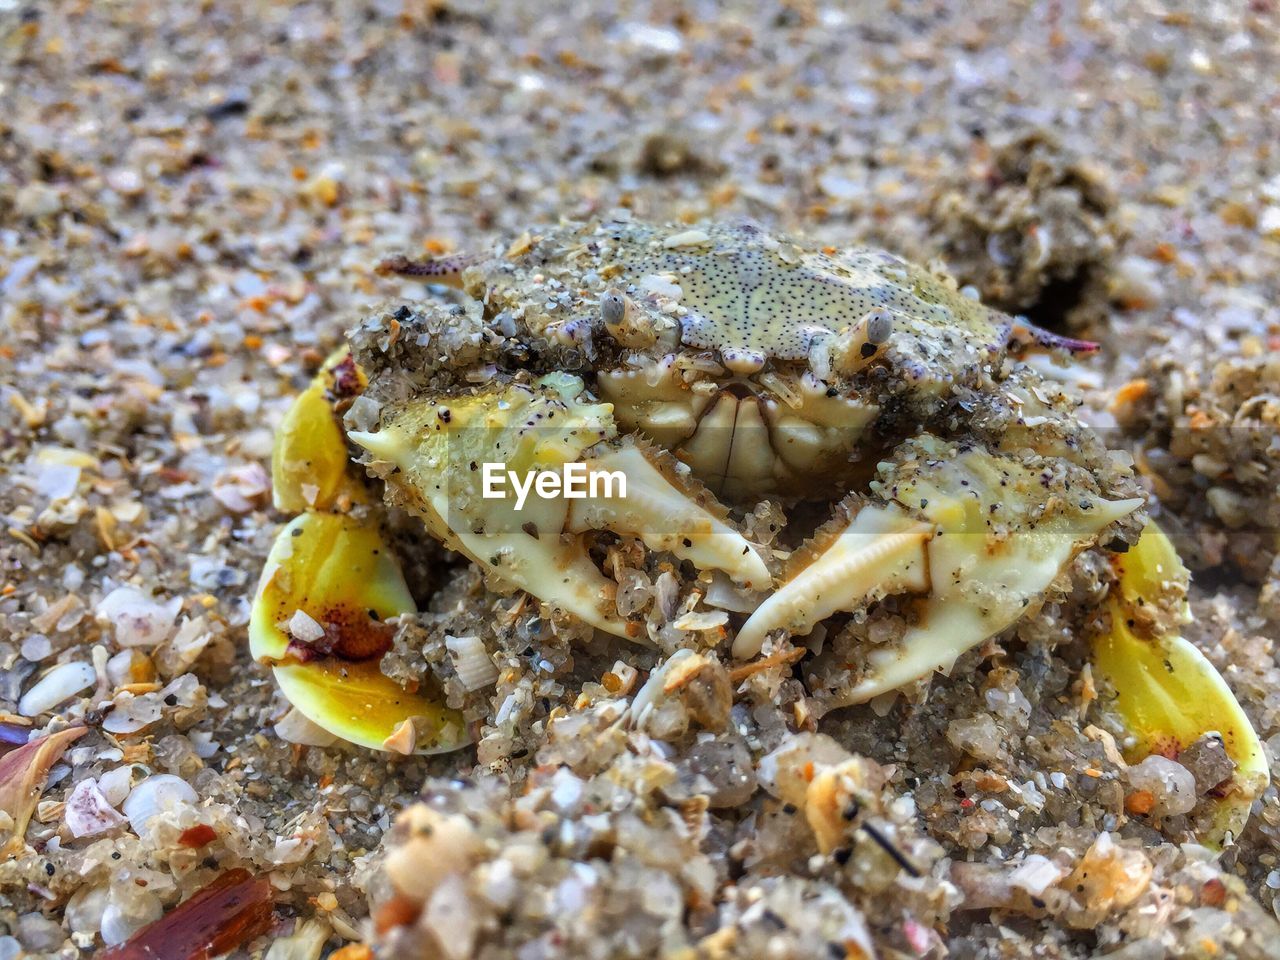 CLOSE-UP OF CRAB ON THE BEACH